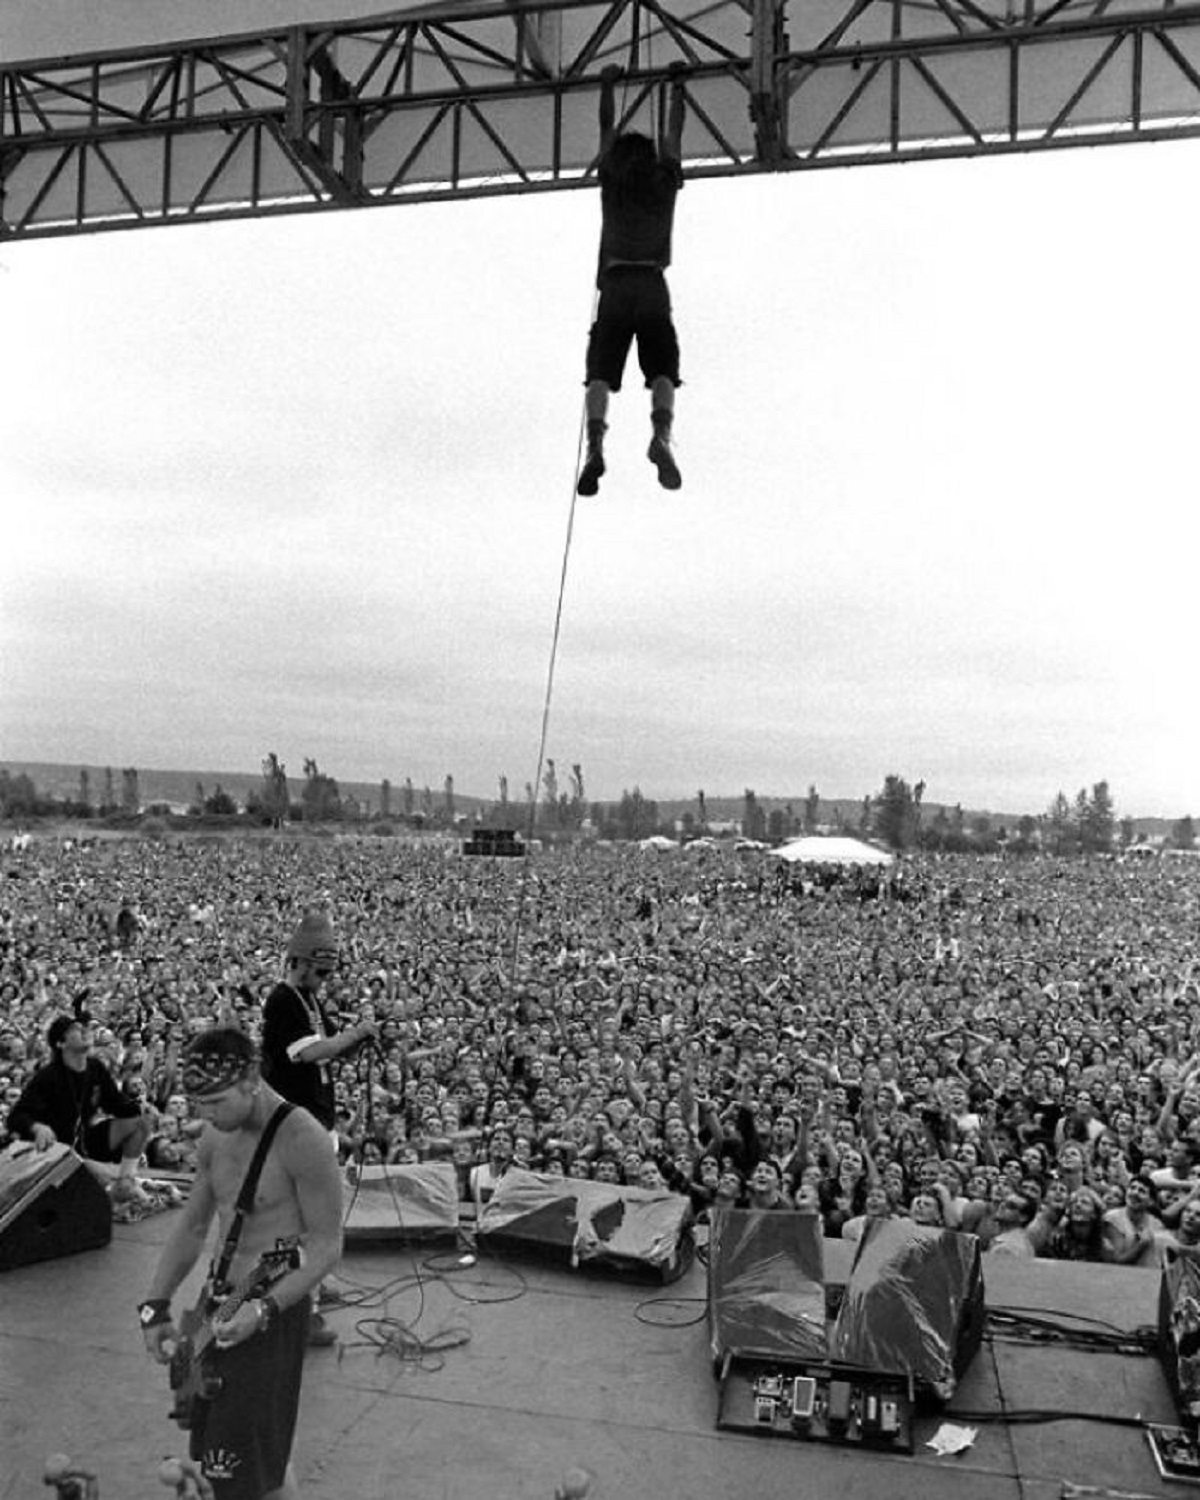 In September Of 1992, Pearl Jam, In Order To Celebrate Their Seeming Overnight Success, Staged A Free Show In Seattle’s Magnusson Park For Over 70,000 People